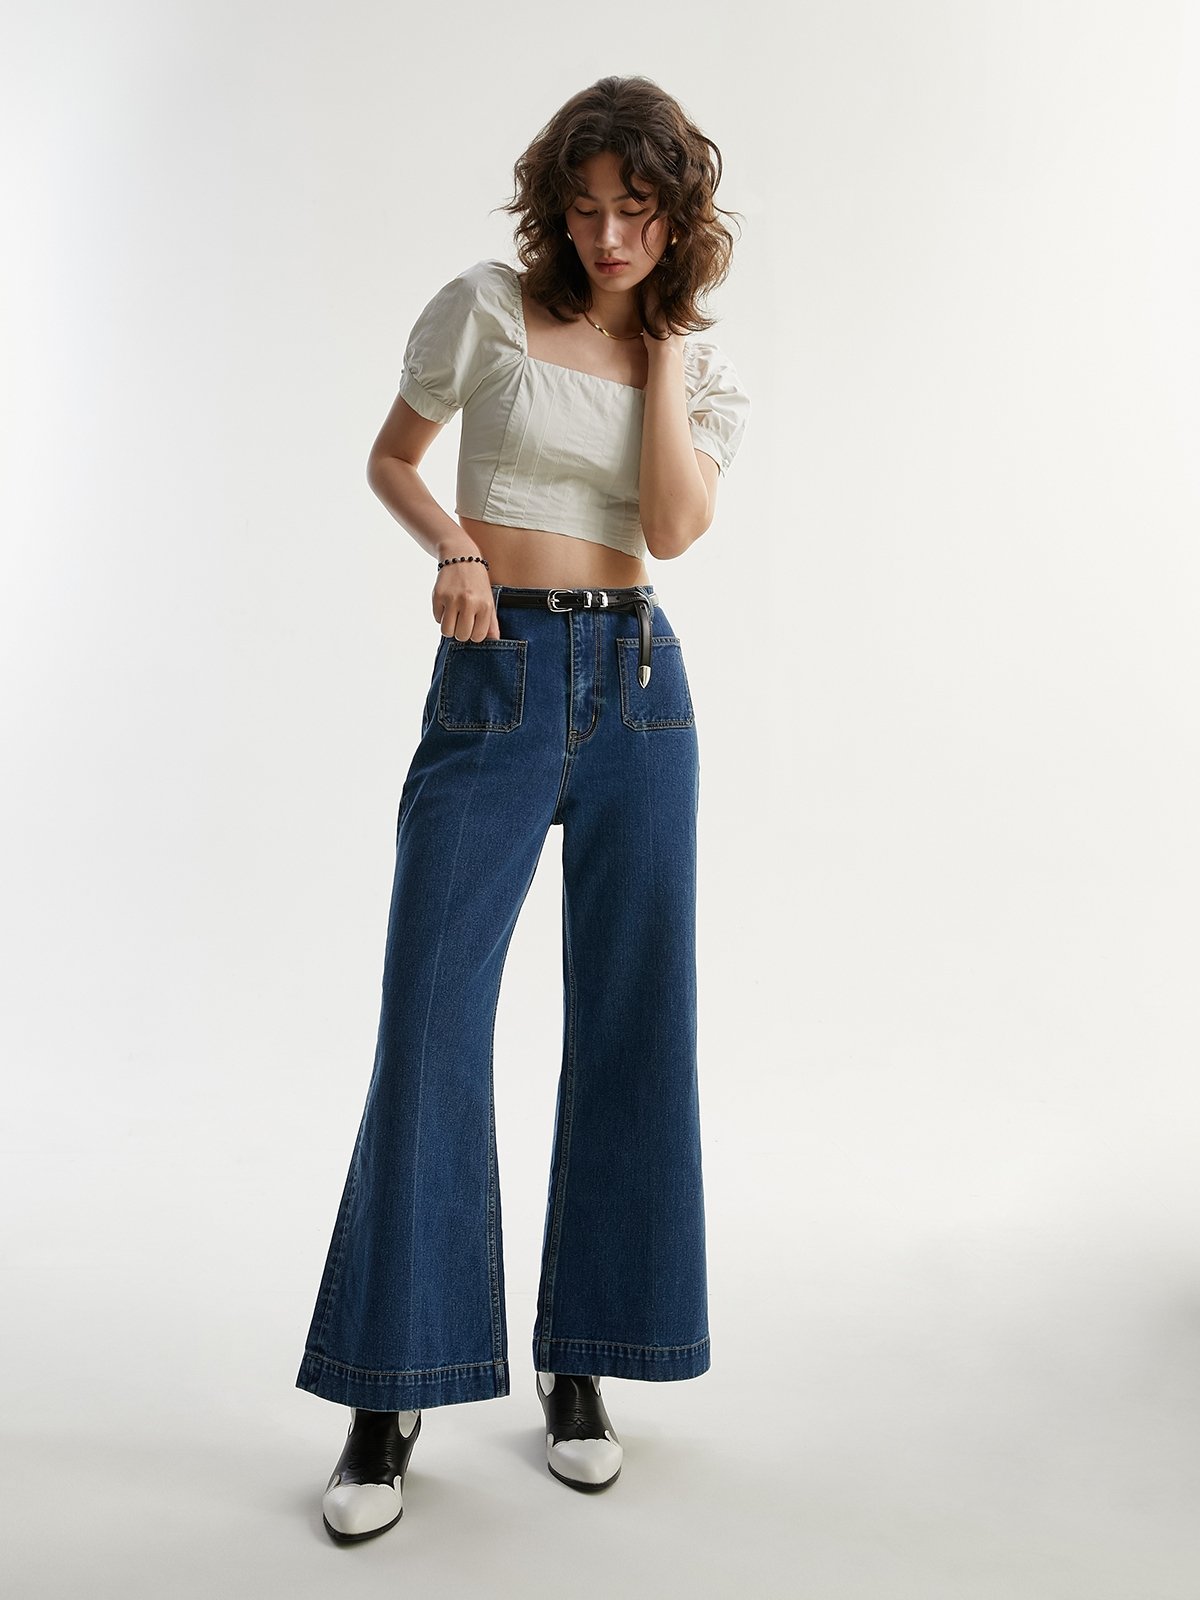 Never Better Flare Pants | Free People